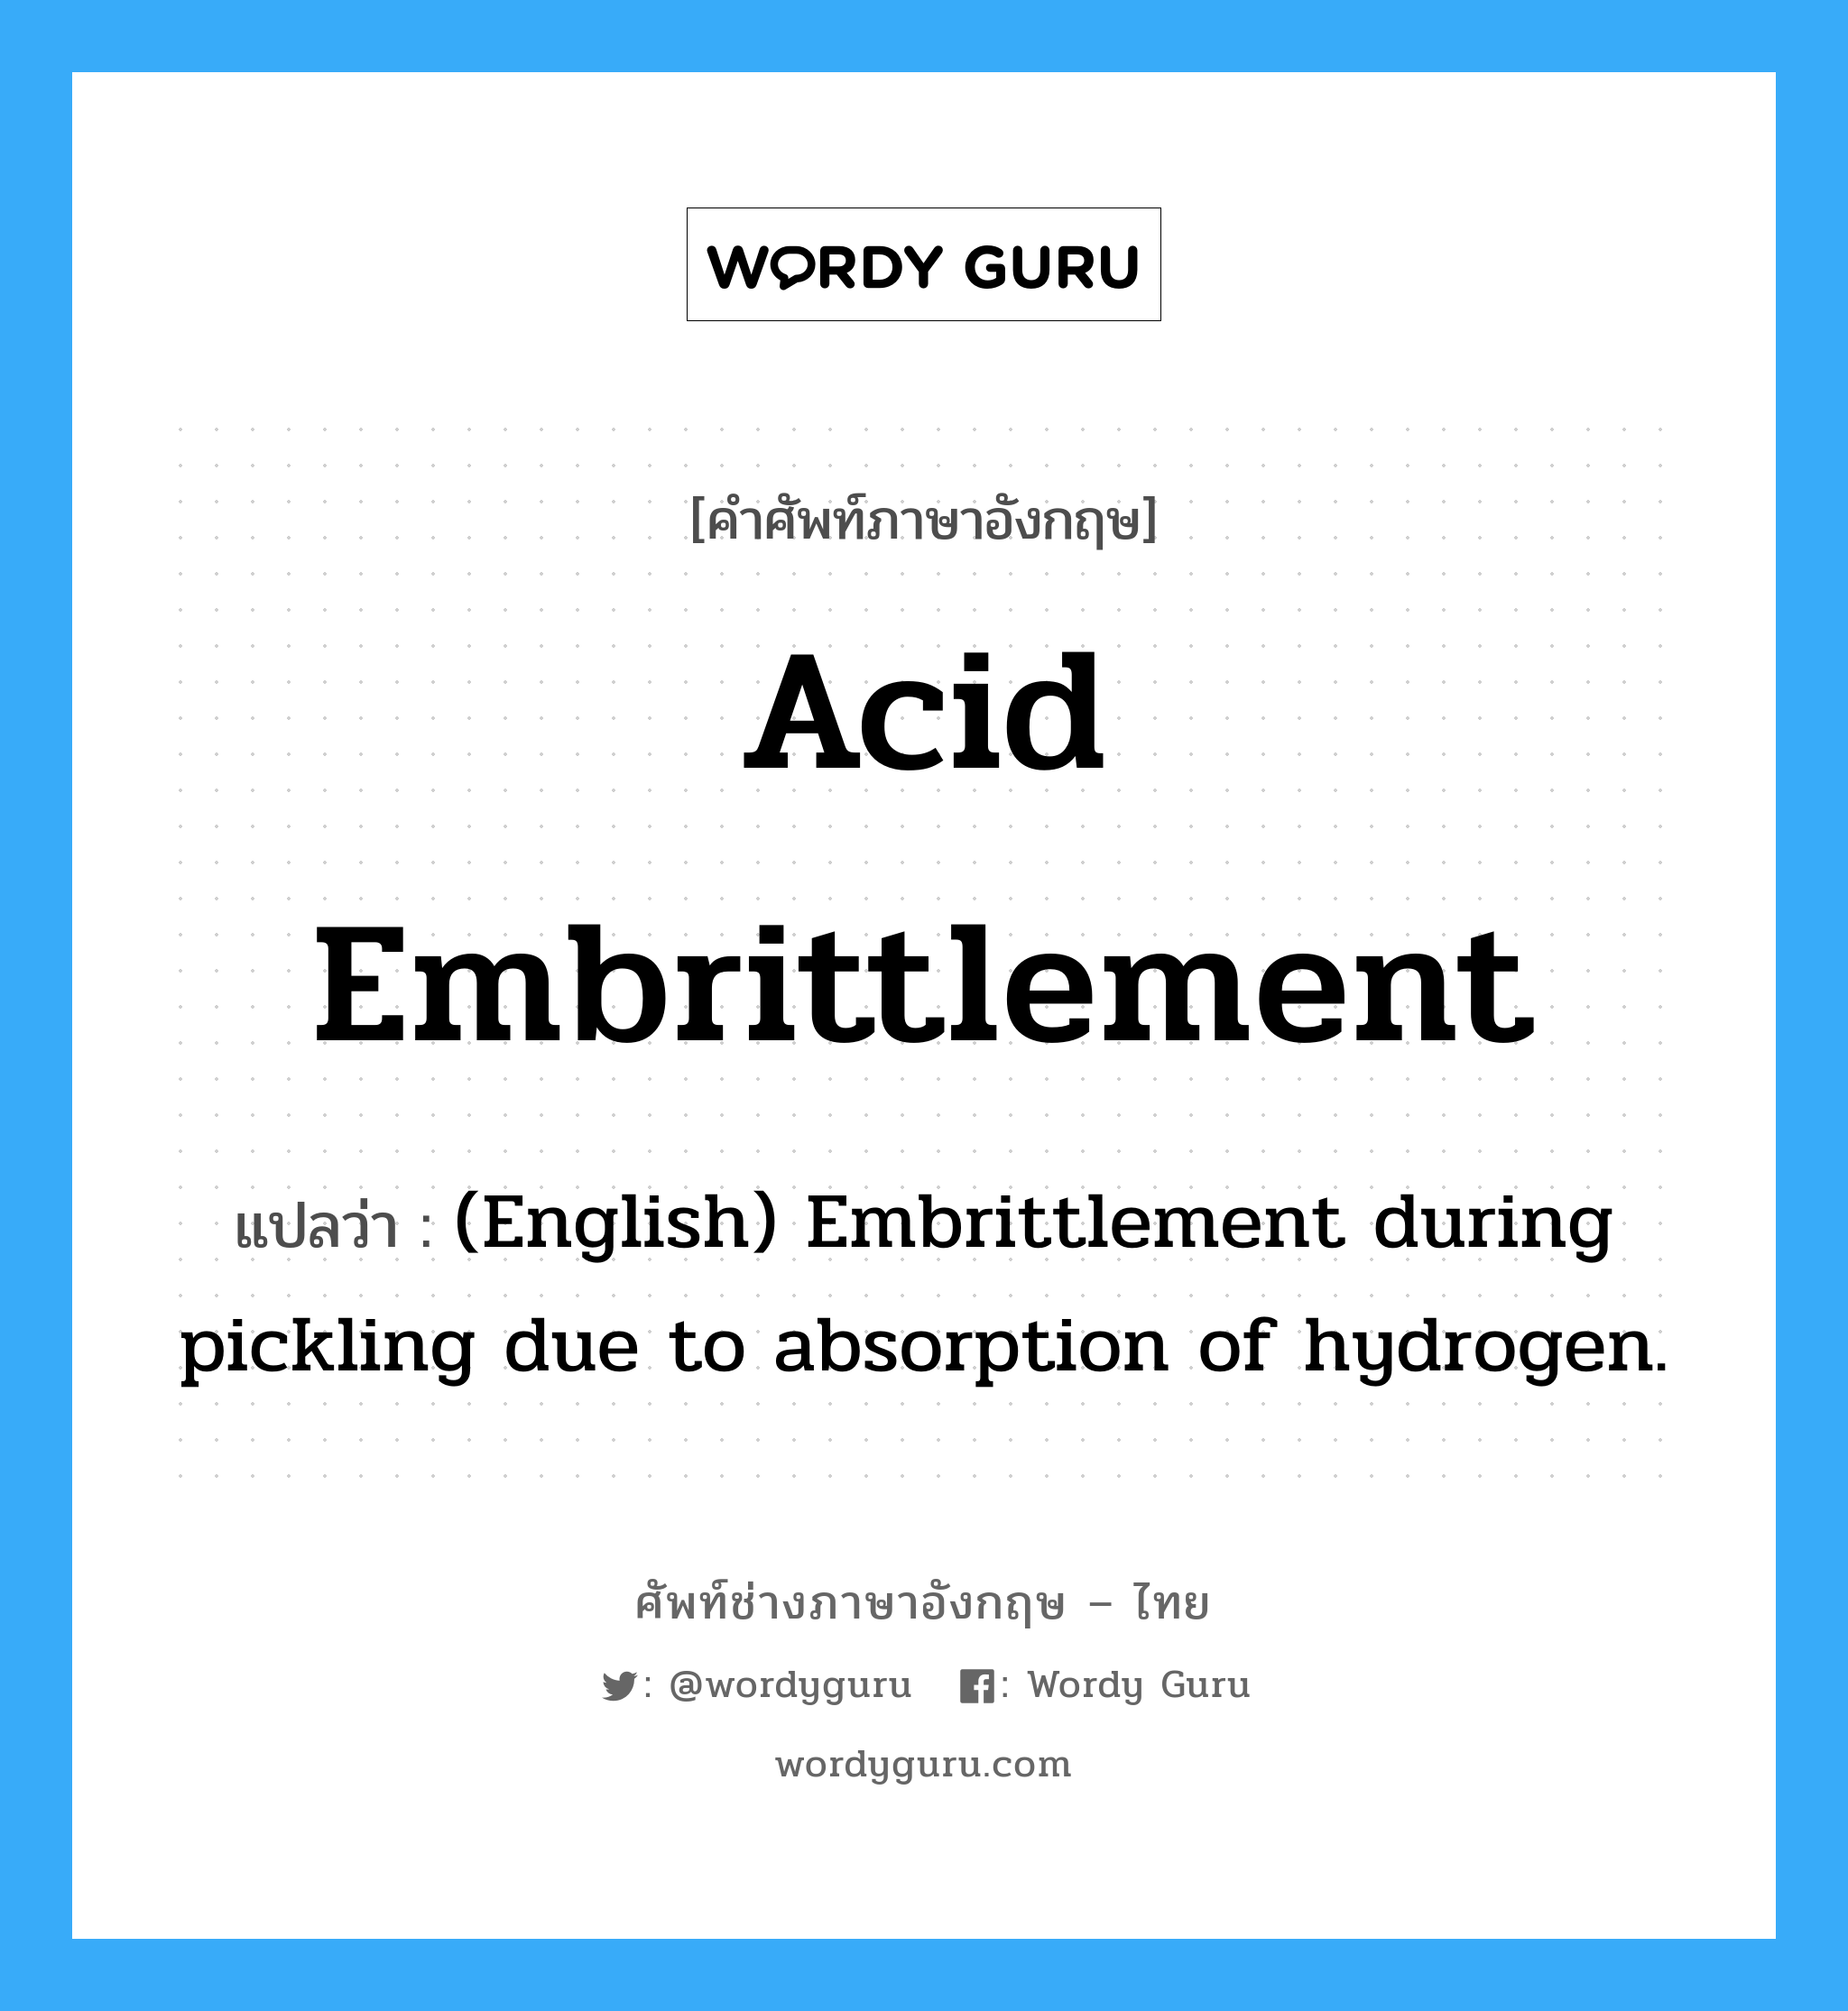 (English) Embrittlement during pickling due to absorption of hydrogen. ภาษาอังกฤษ?, คำศัพท์ช่างภาษาอังกฤษ - ไทย (English) Embrittlement during pickling due to absorption of hydrogen. คำศัพท์ภาษาอังกฤษ (English) Embrittlement during pickling due to absorption of hydrogen. แปลว่า Acid Embrittlement